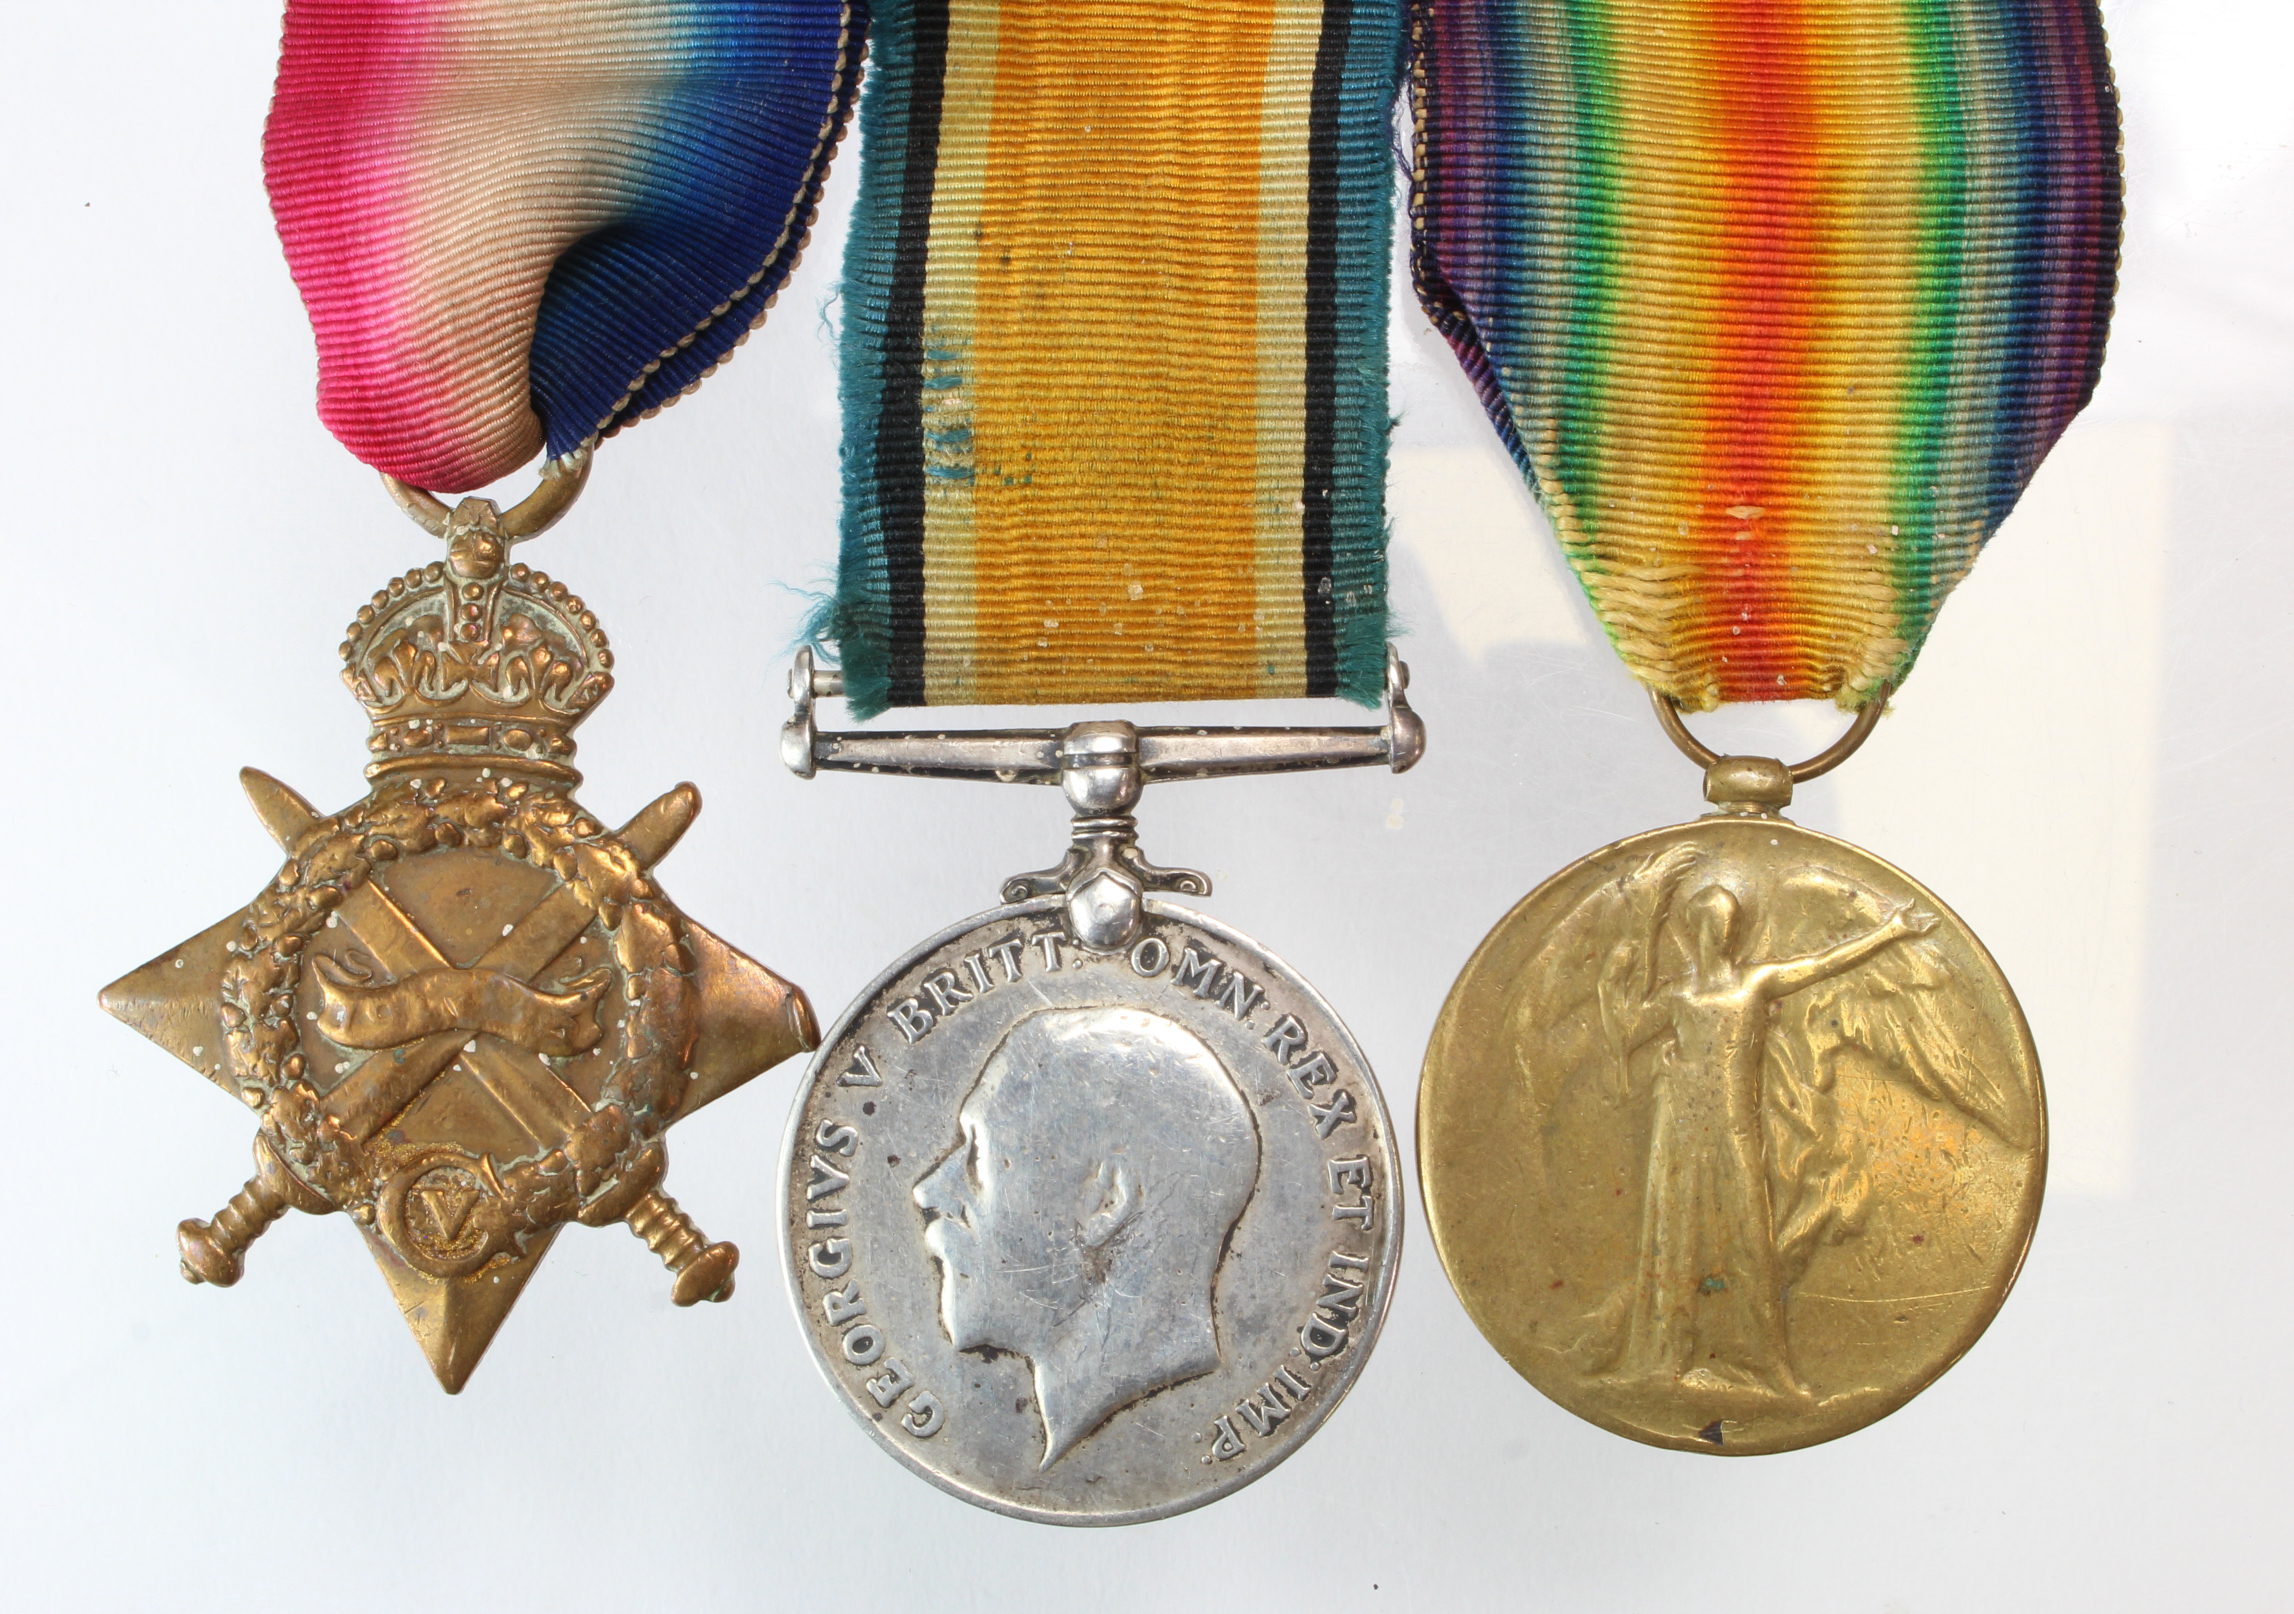 1915 Star Trio to L-8919 Pte A Taylor, Middlesex Regt. Medal mounted as worn and very polished. Sold